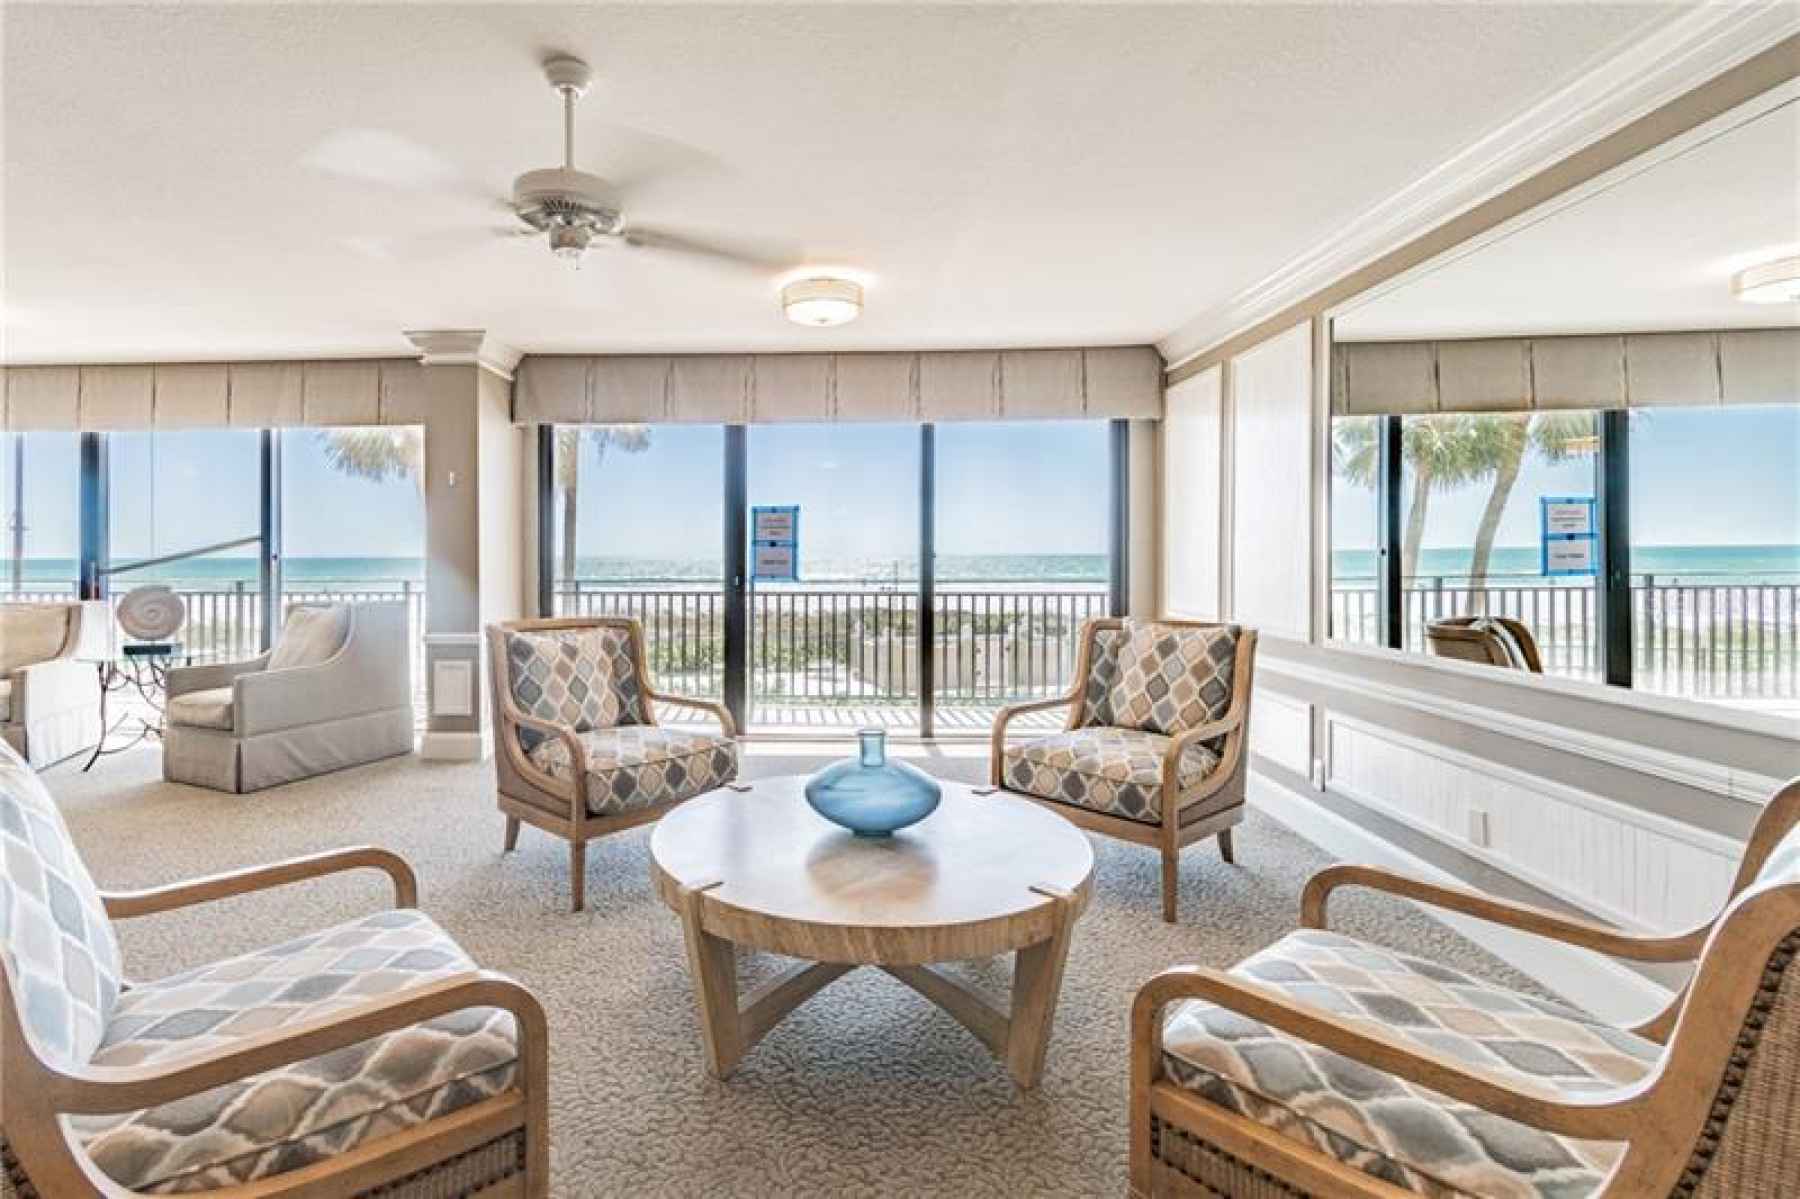 A quiet space to relax alone or with friends - overlooking the Gulf